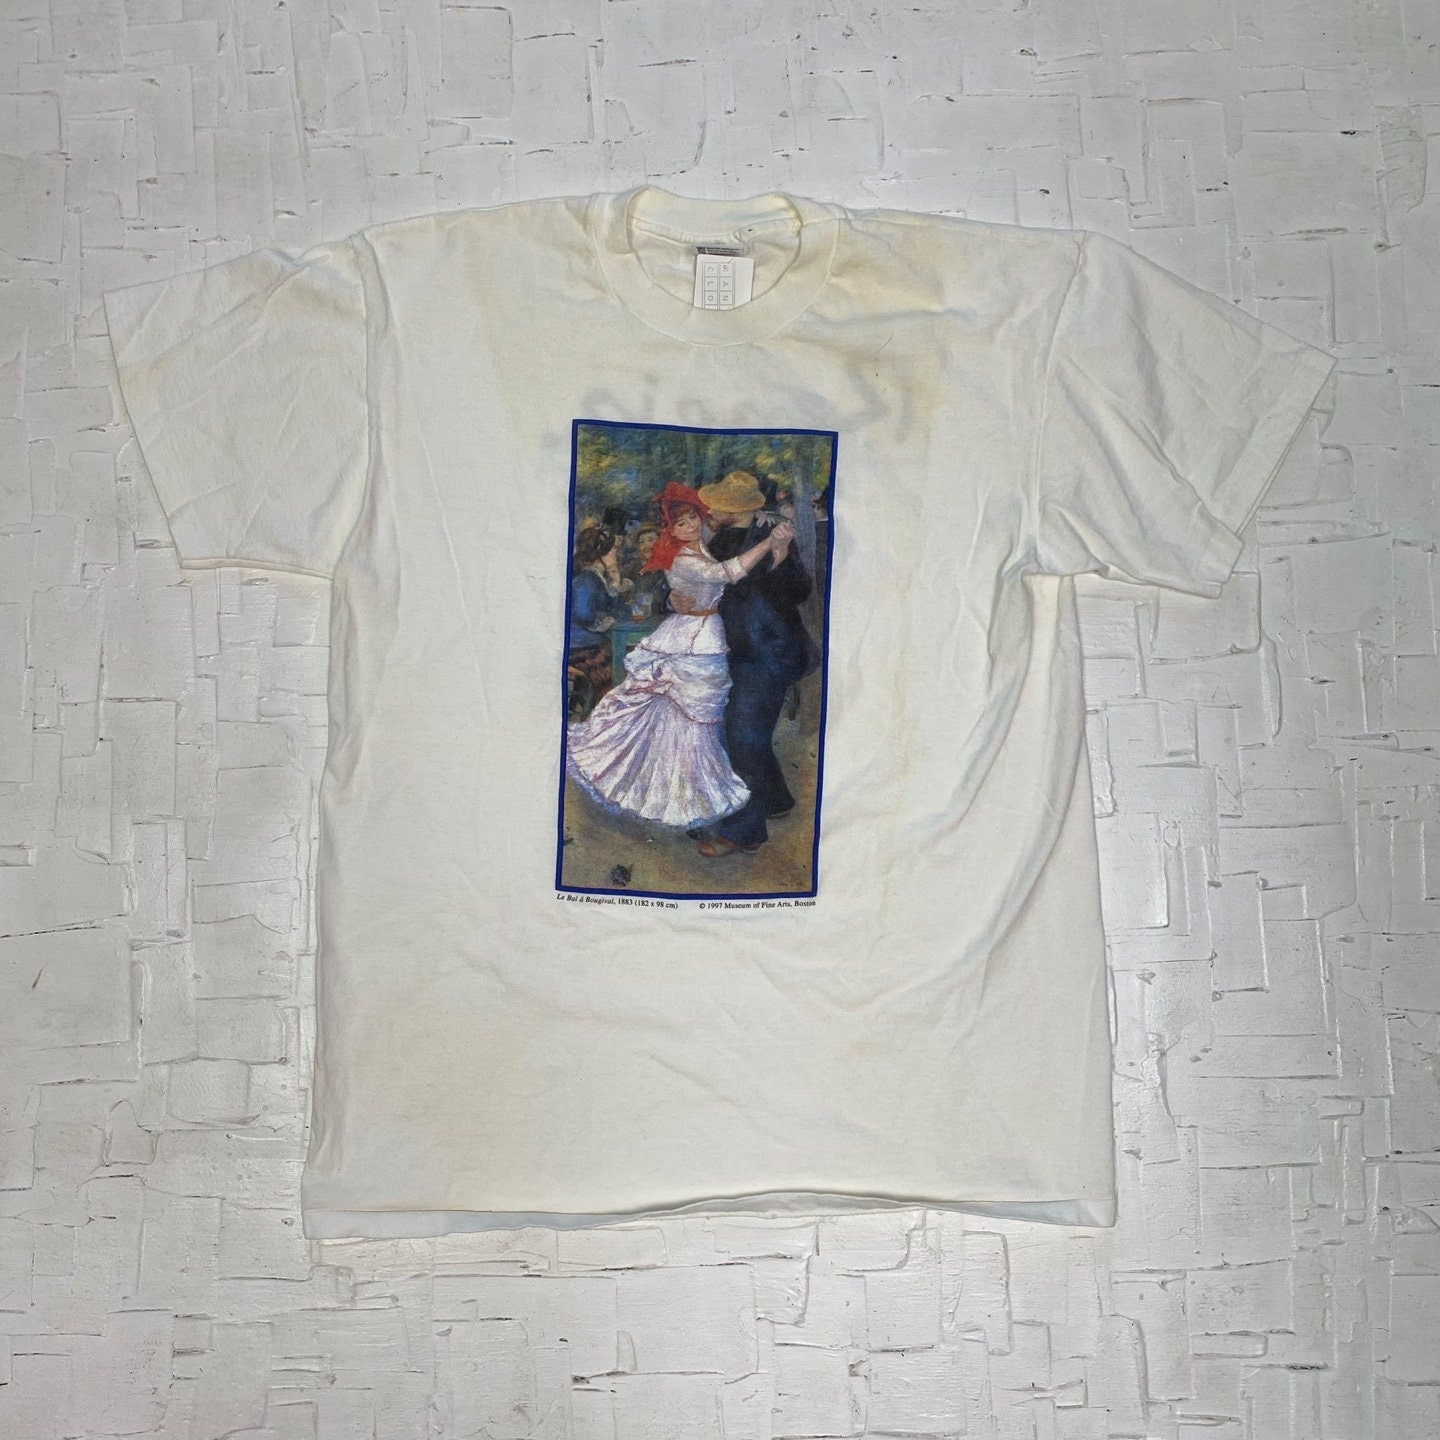 1997 Vintage Graphic T-Shirt with "Le Bal a Bougival" Painting Print from Museum of Fine Arts, Boston |Vintage T-Shirt| Size L | SKU ST-2118